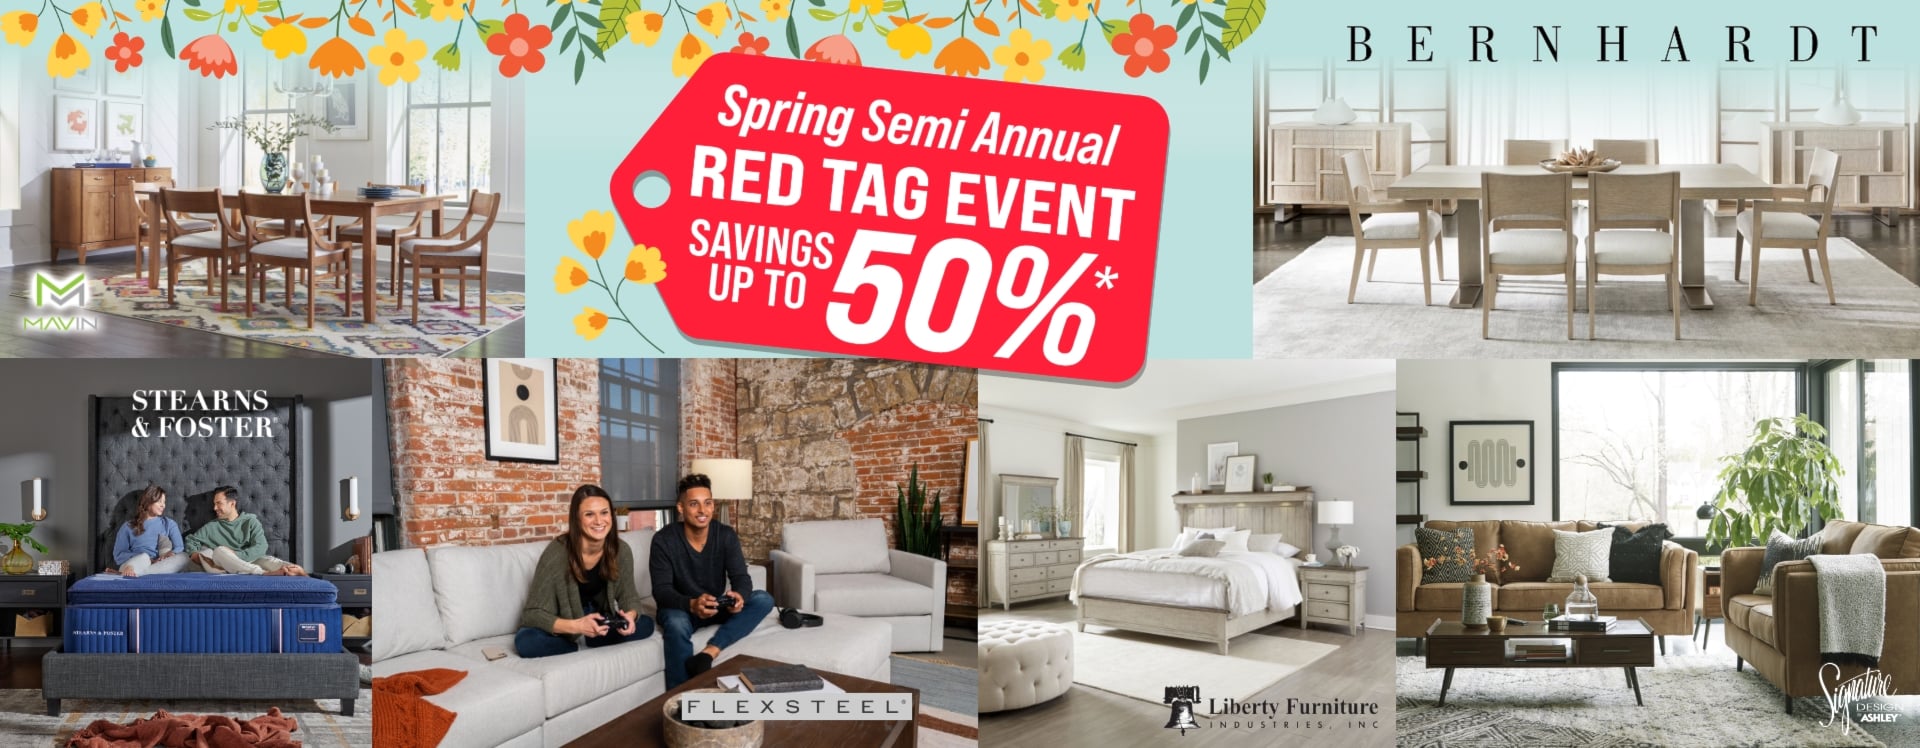 Spring Semi Annual Red Tag Event - Savings up to 50%